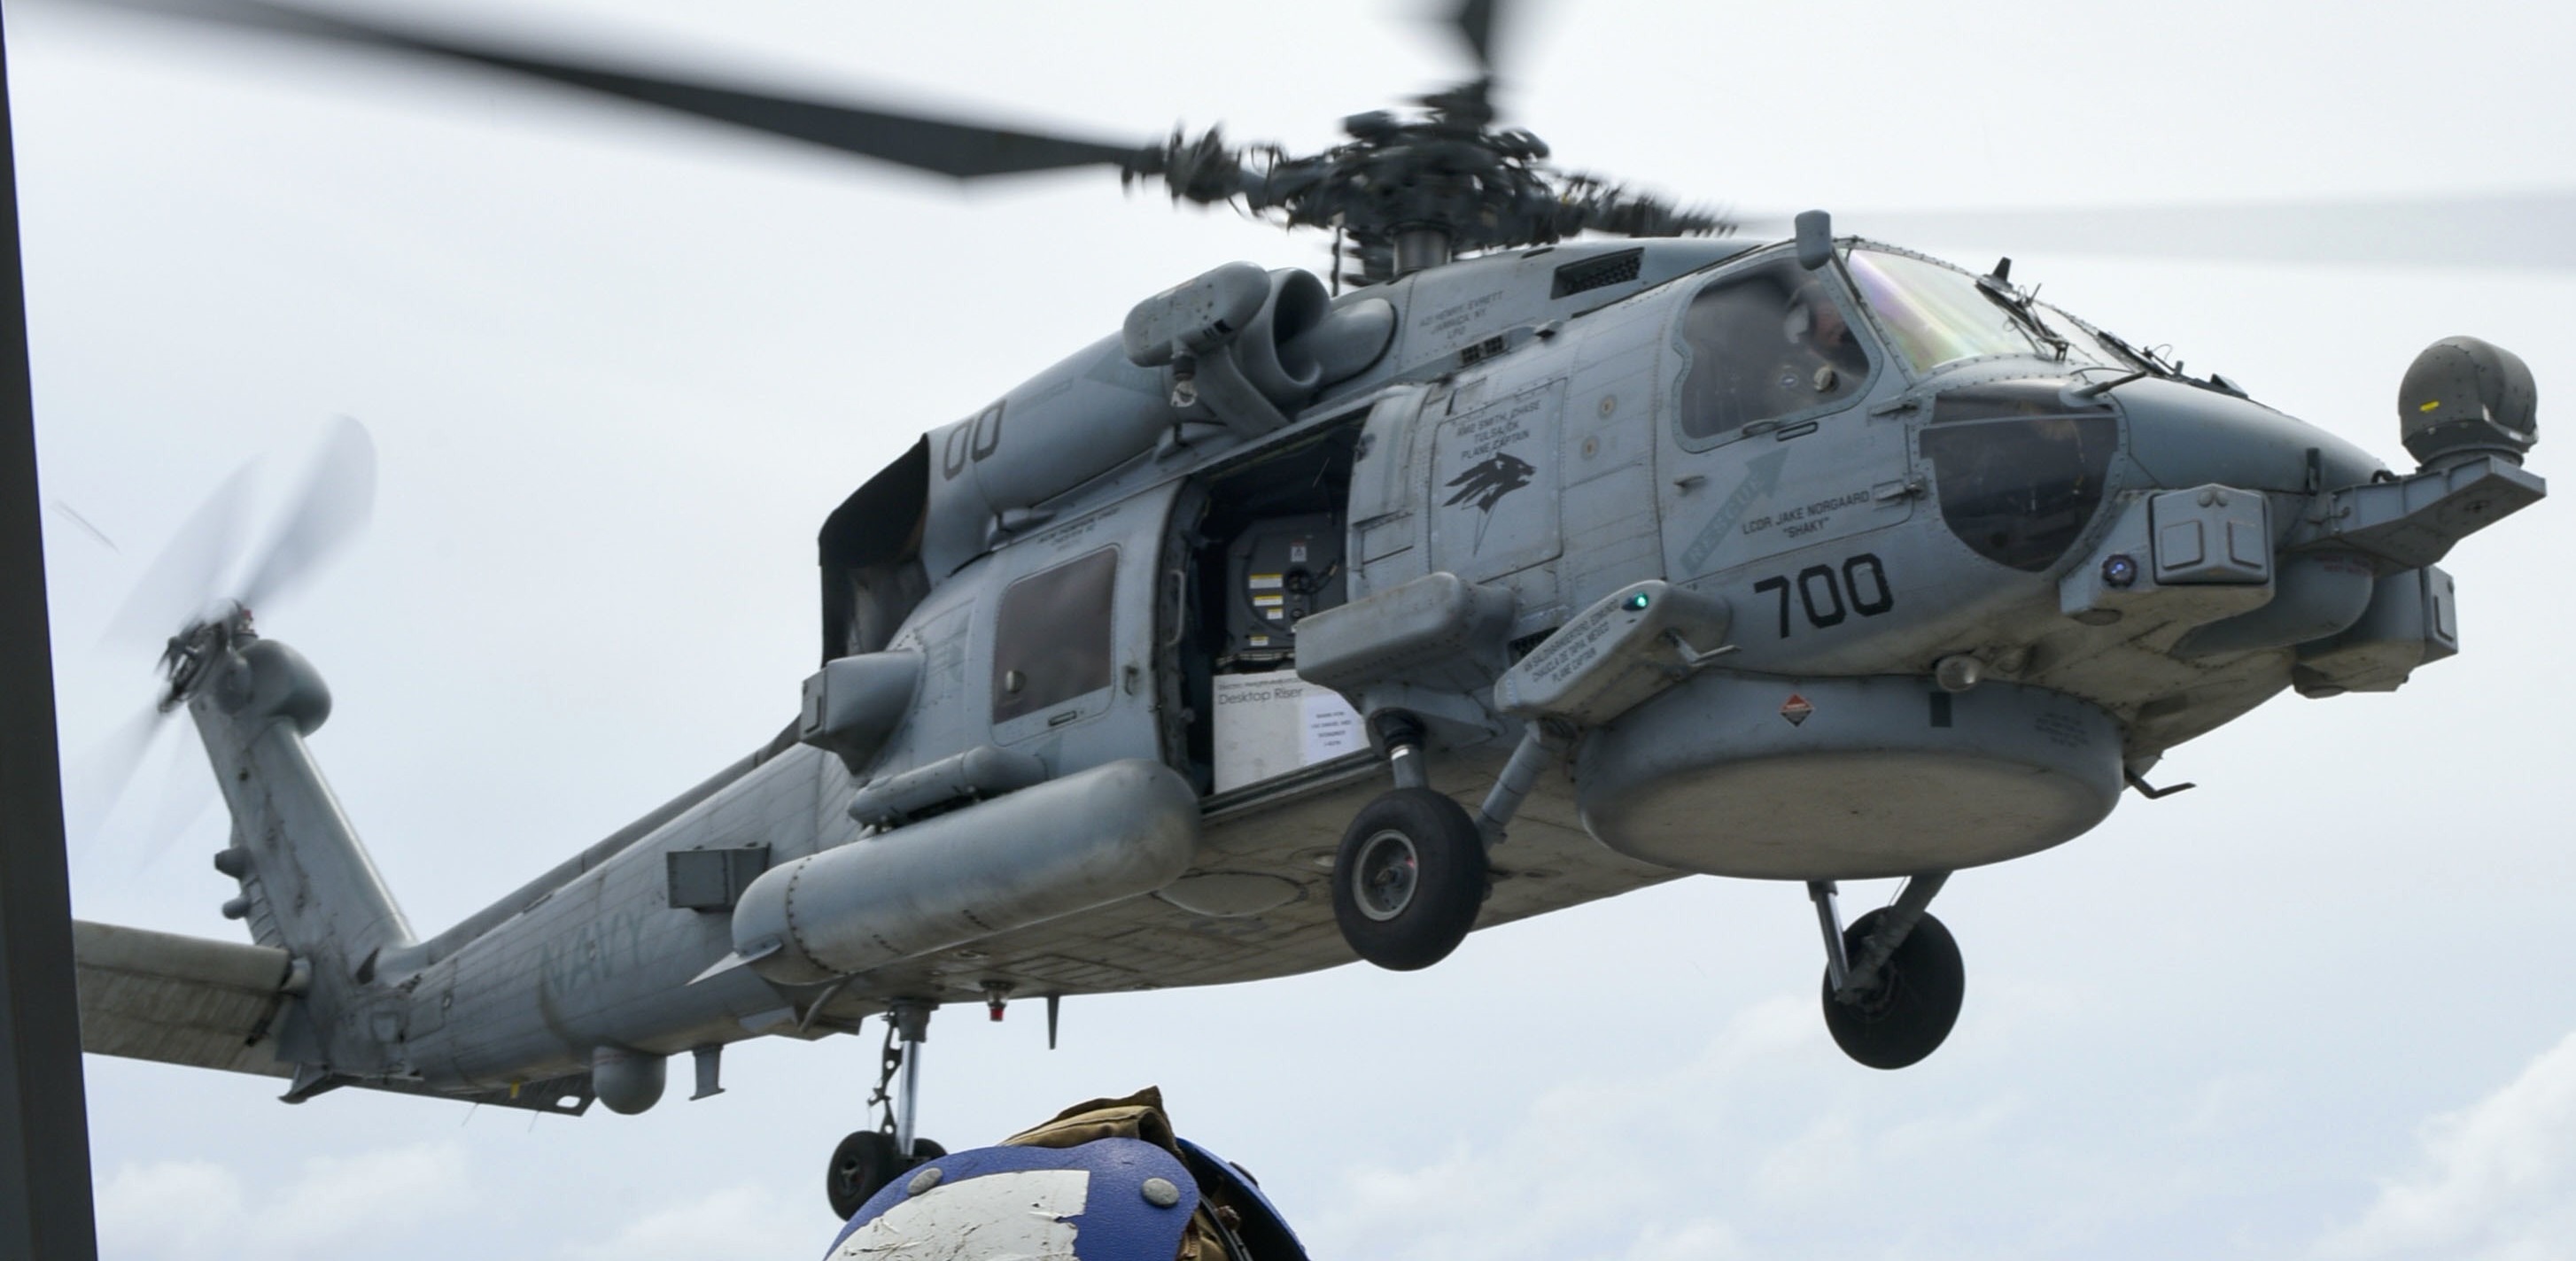 hsm-75 wolf pack helicopter maritime strike squadron mh-60r seahawk ddg-59 uss russell 94